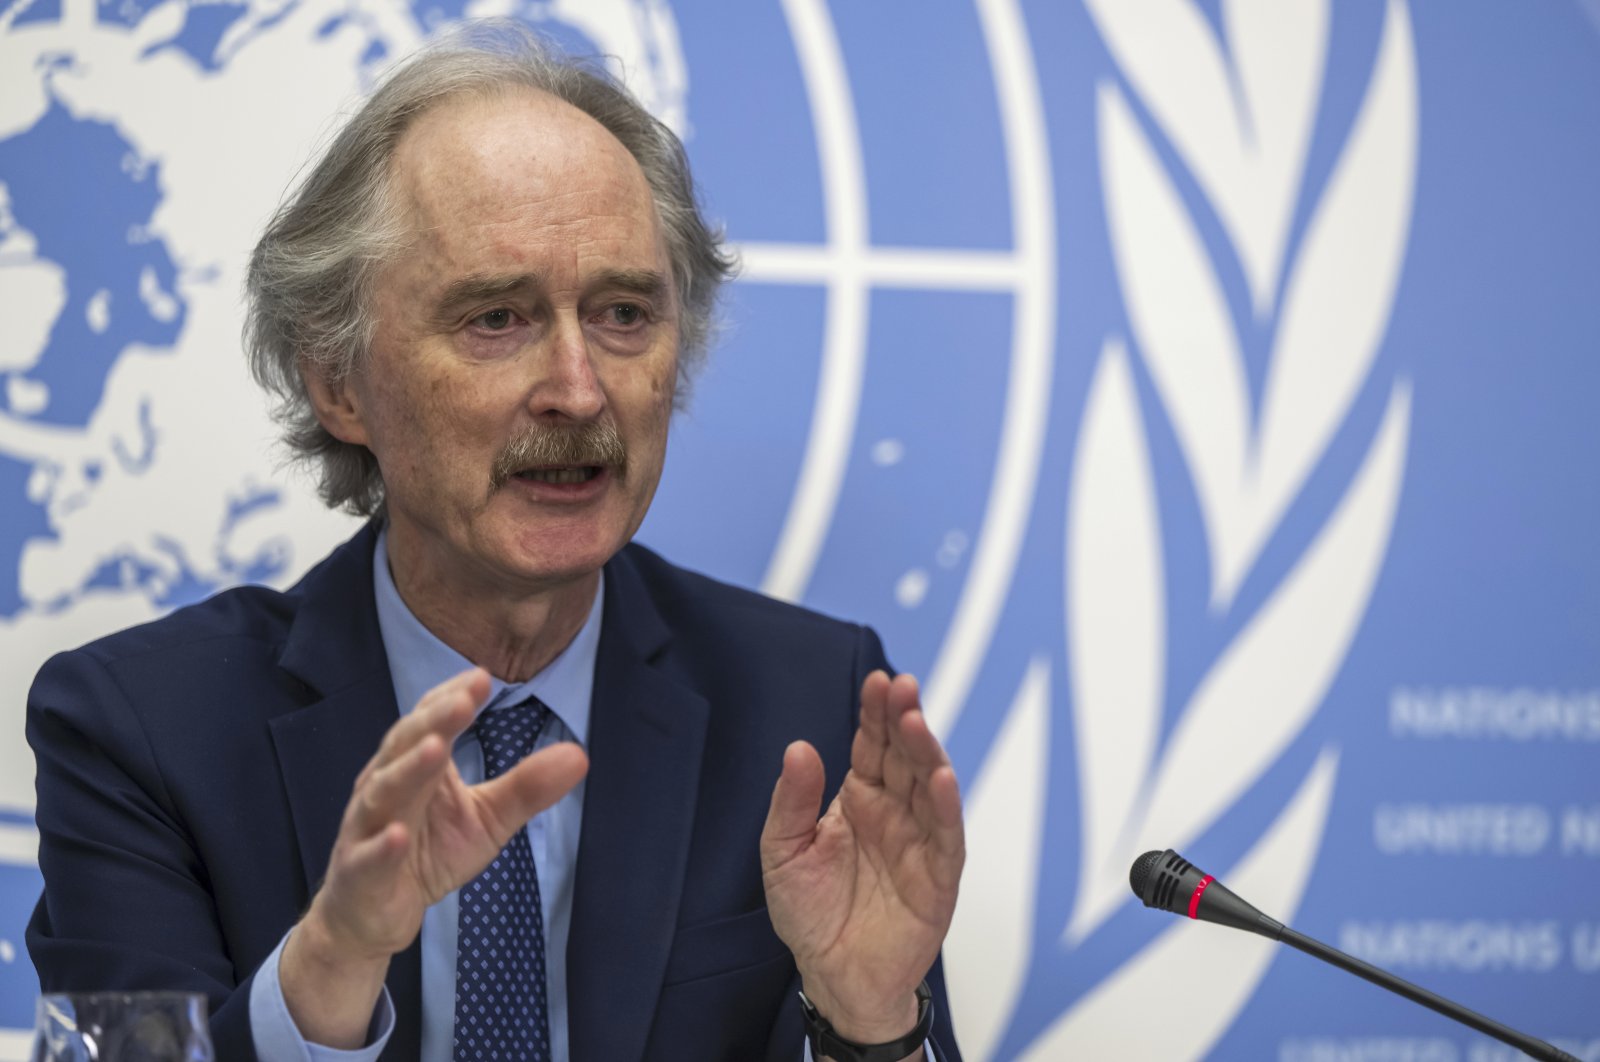 Geir O. Pedersen, U.N. Special Envoy for Syria, speaks about the update on the situation regarding Syria, during a press conference at the European headquarters of the United Nations in Geneva, Switzerland, Wednesday, March 8, 2023. (AP Photo)